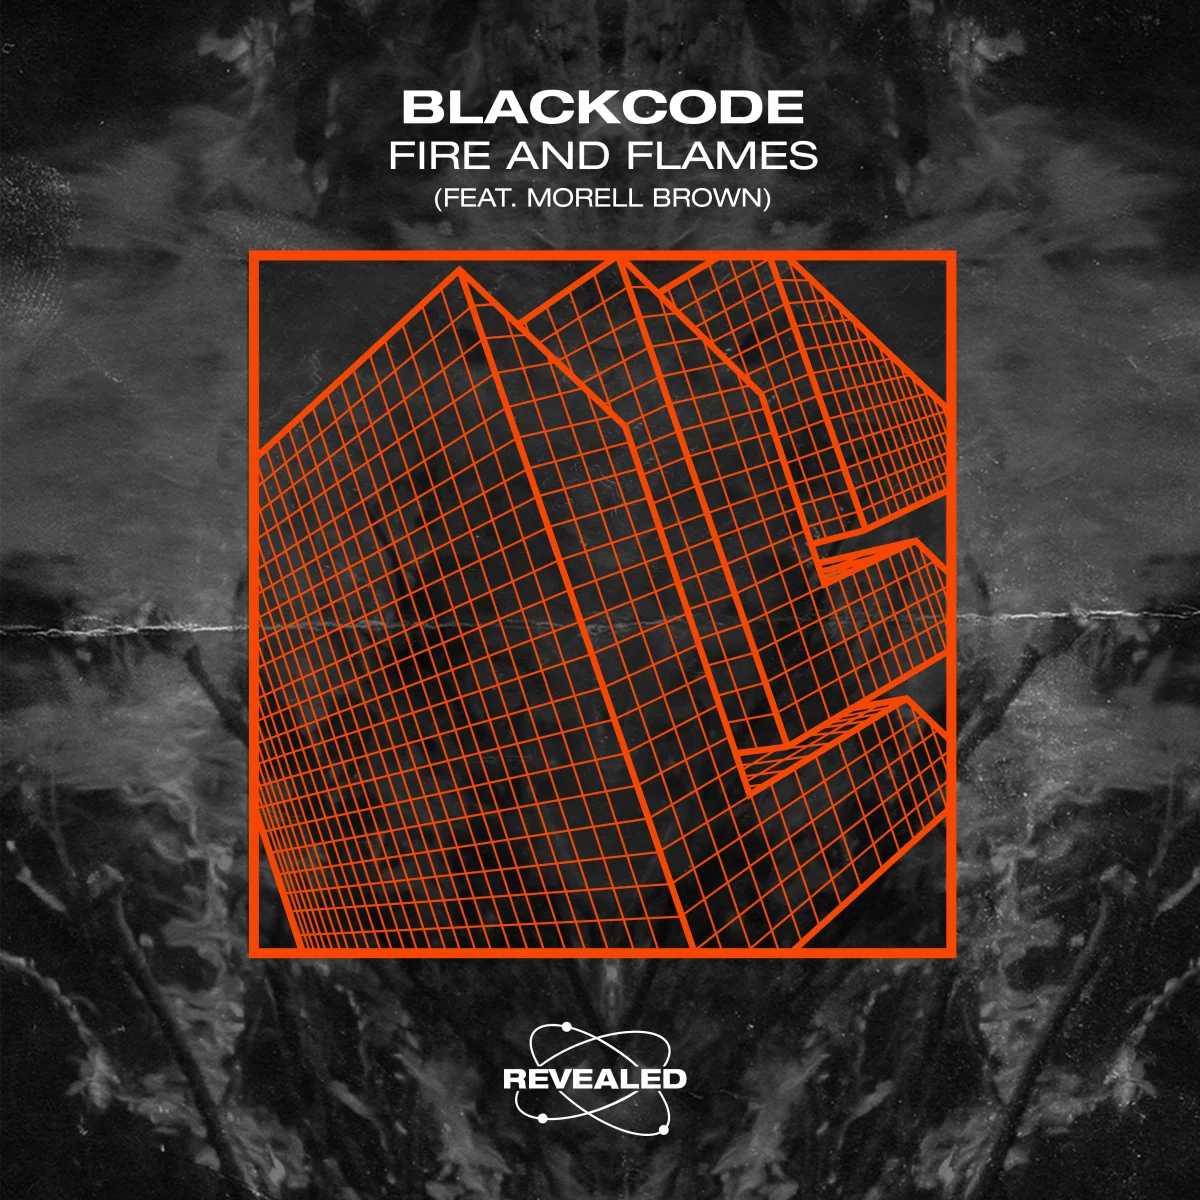 Fire and Flames - Blackcode⁠ feat. Morell Brown⁠